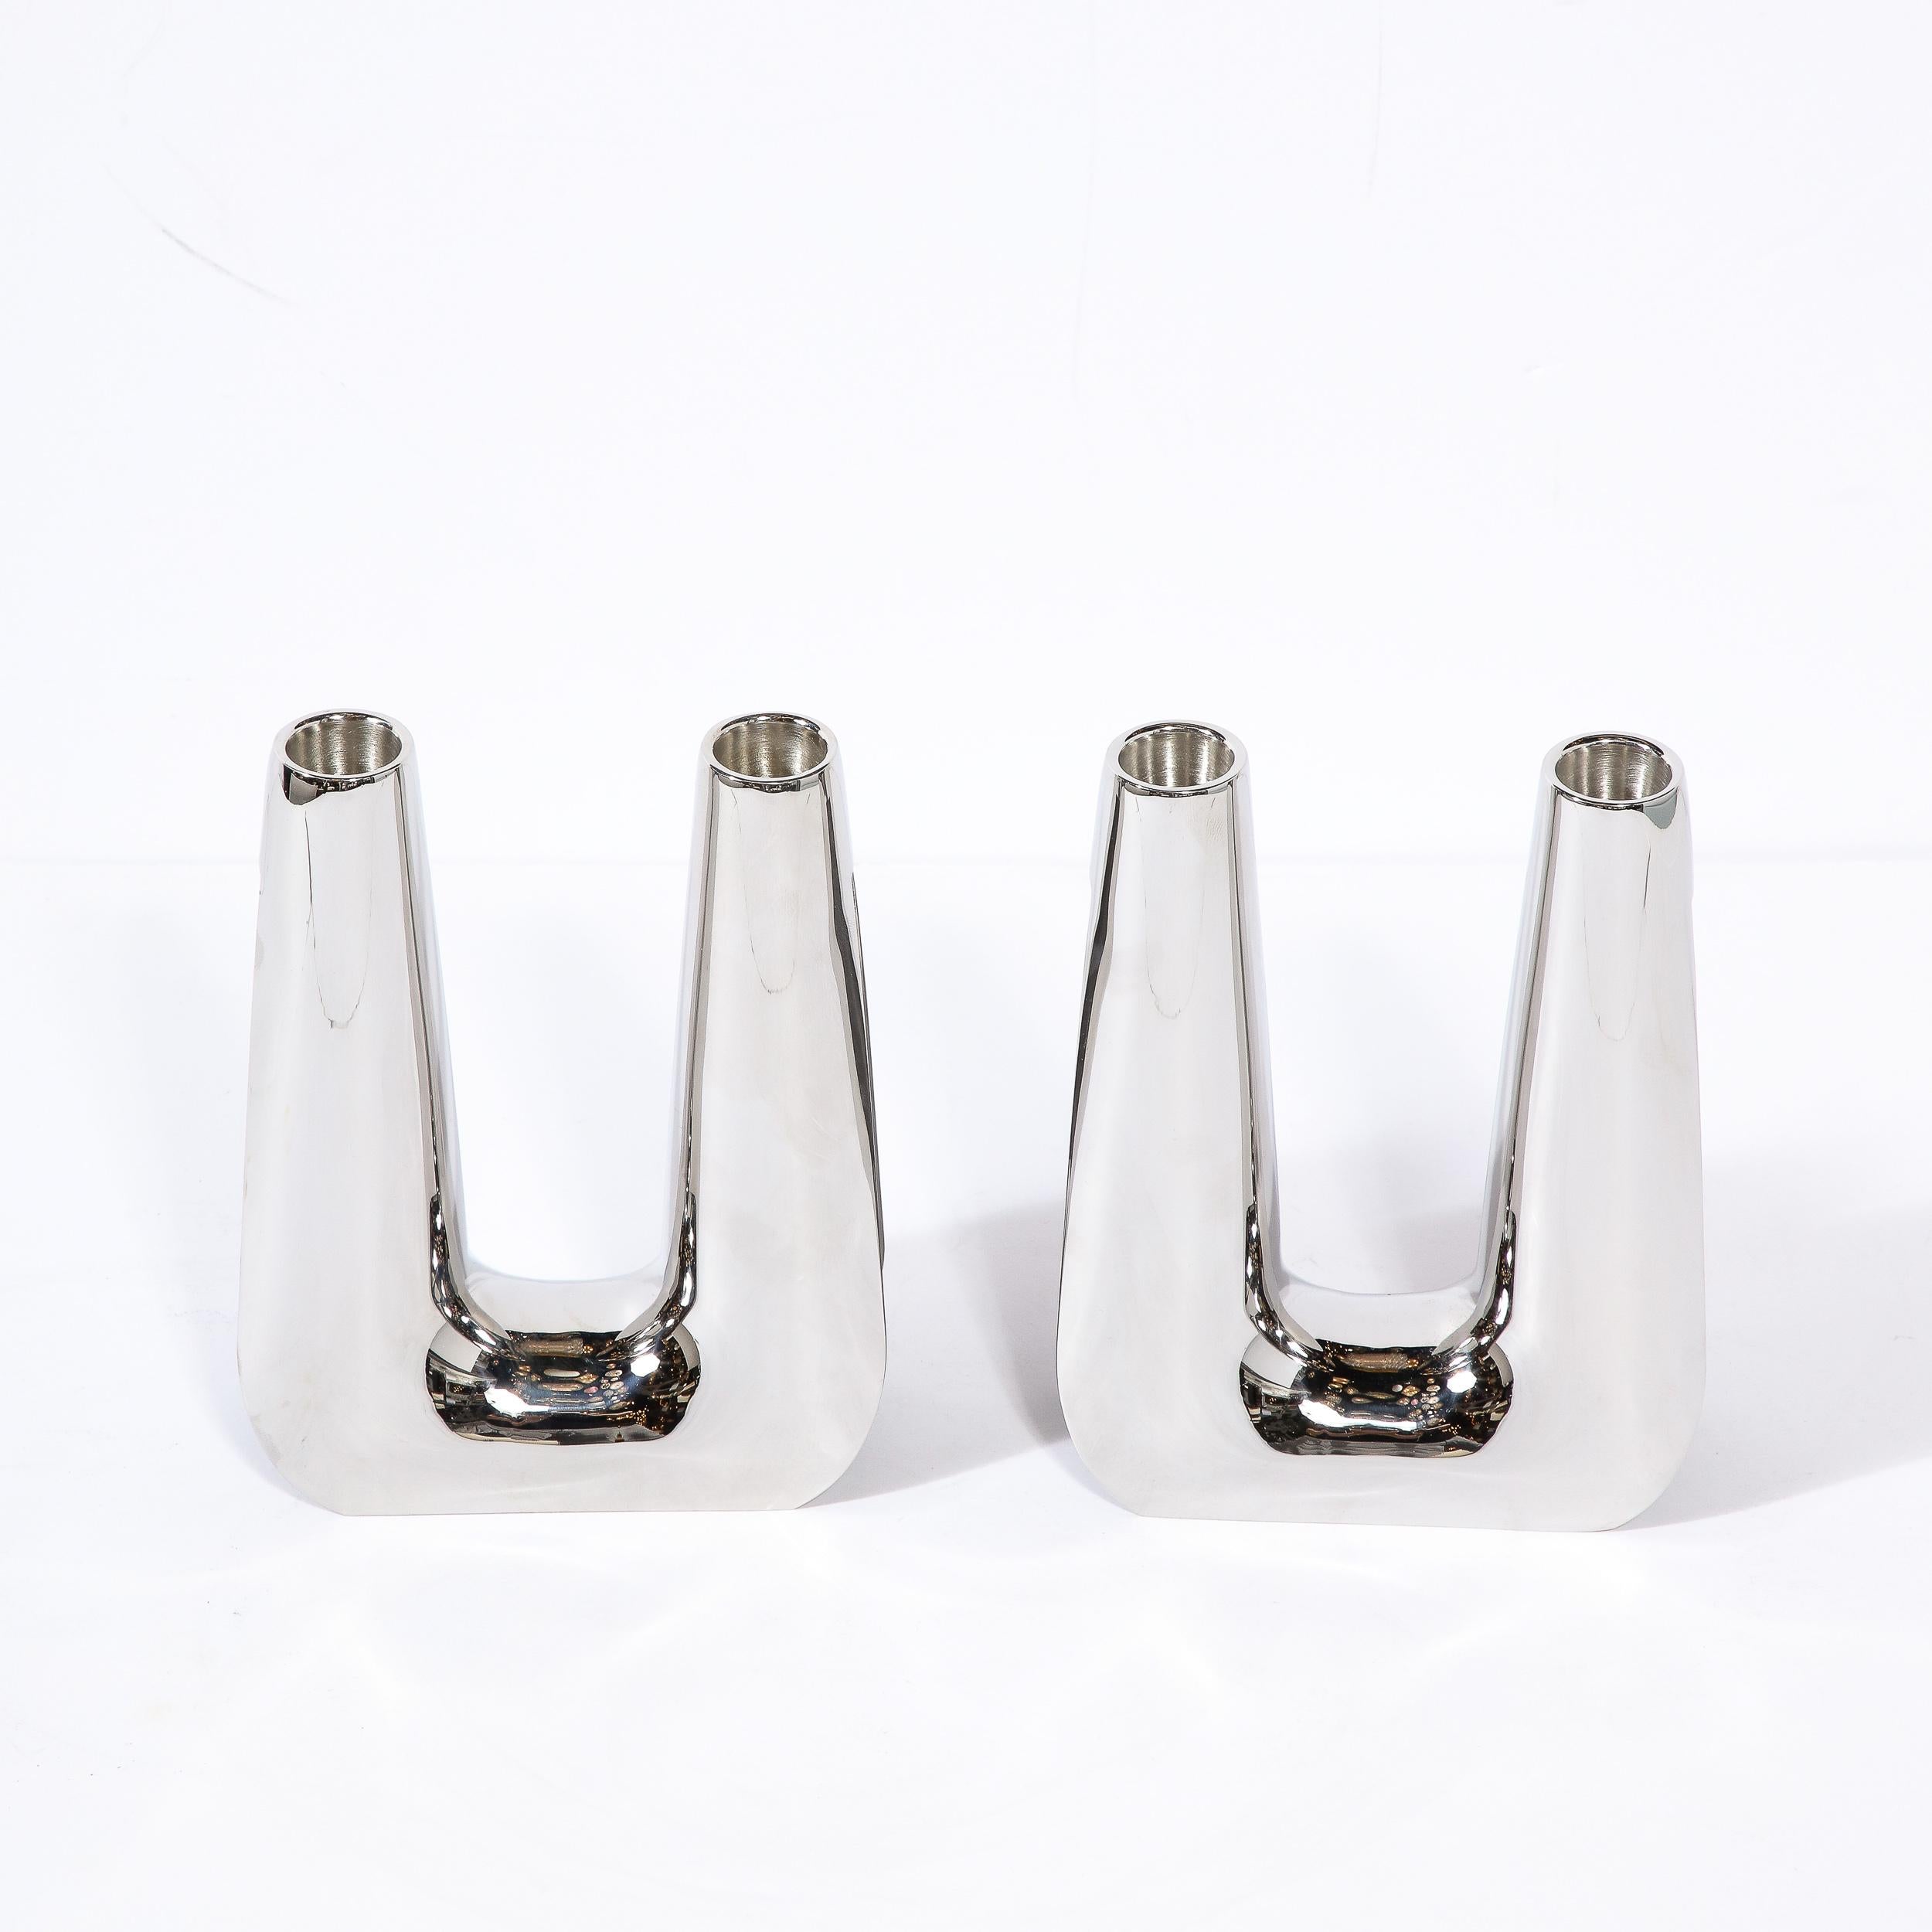 This beautifully sculpted Pair of Valley Form Two Light Candelabras in Stainless Steel are designed by esteemed silversmith and manufacturer George Jensen in Denmark during the 20th Century. Highly modern and minimal in their design while